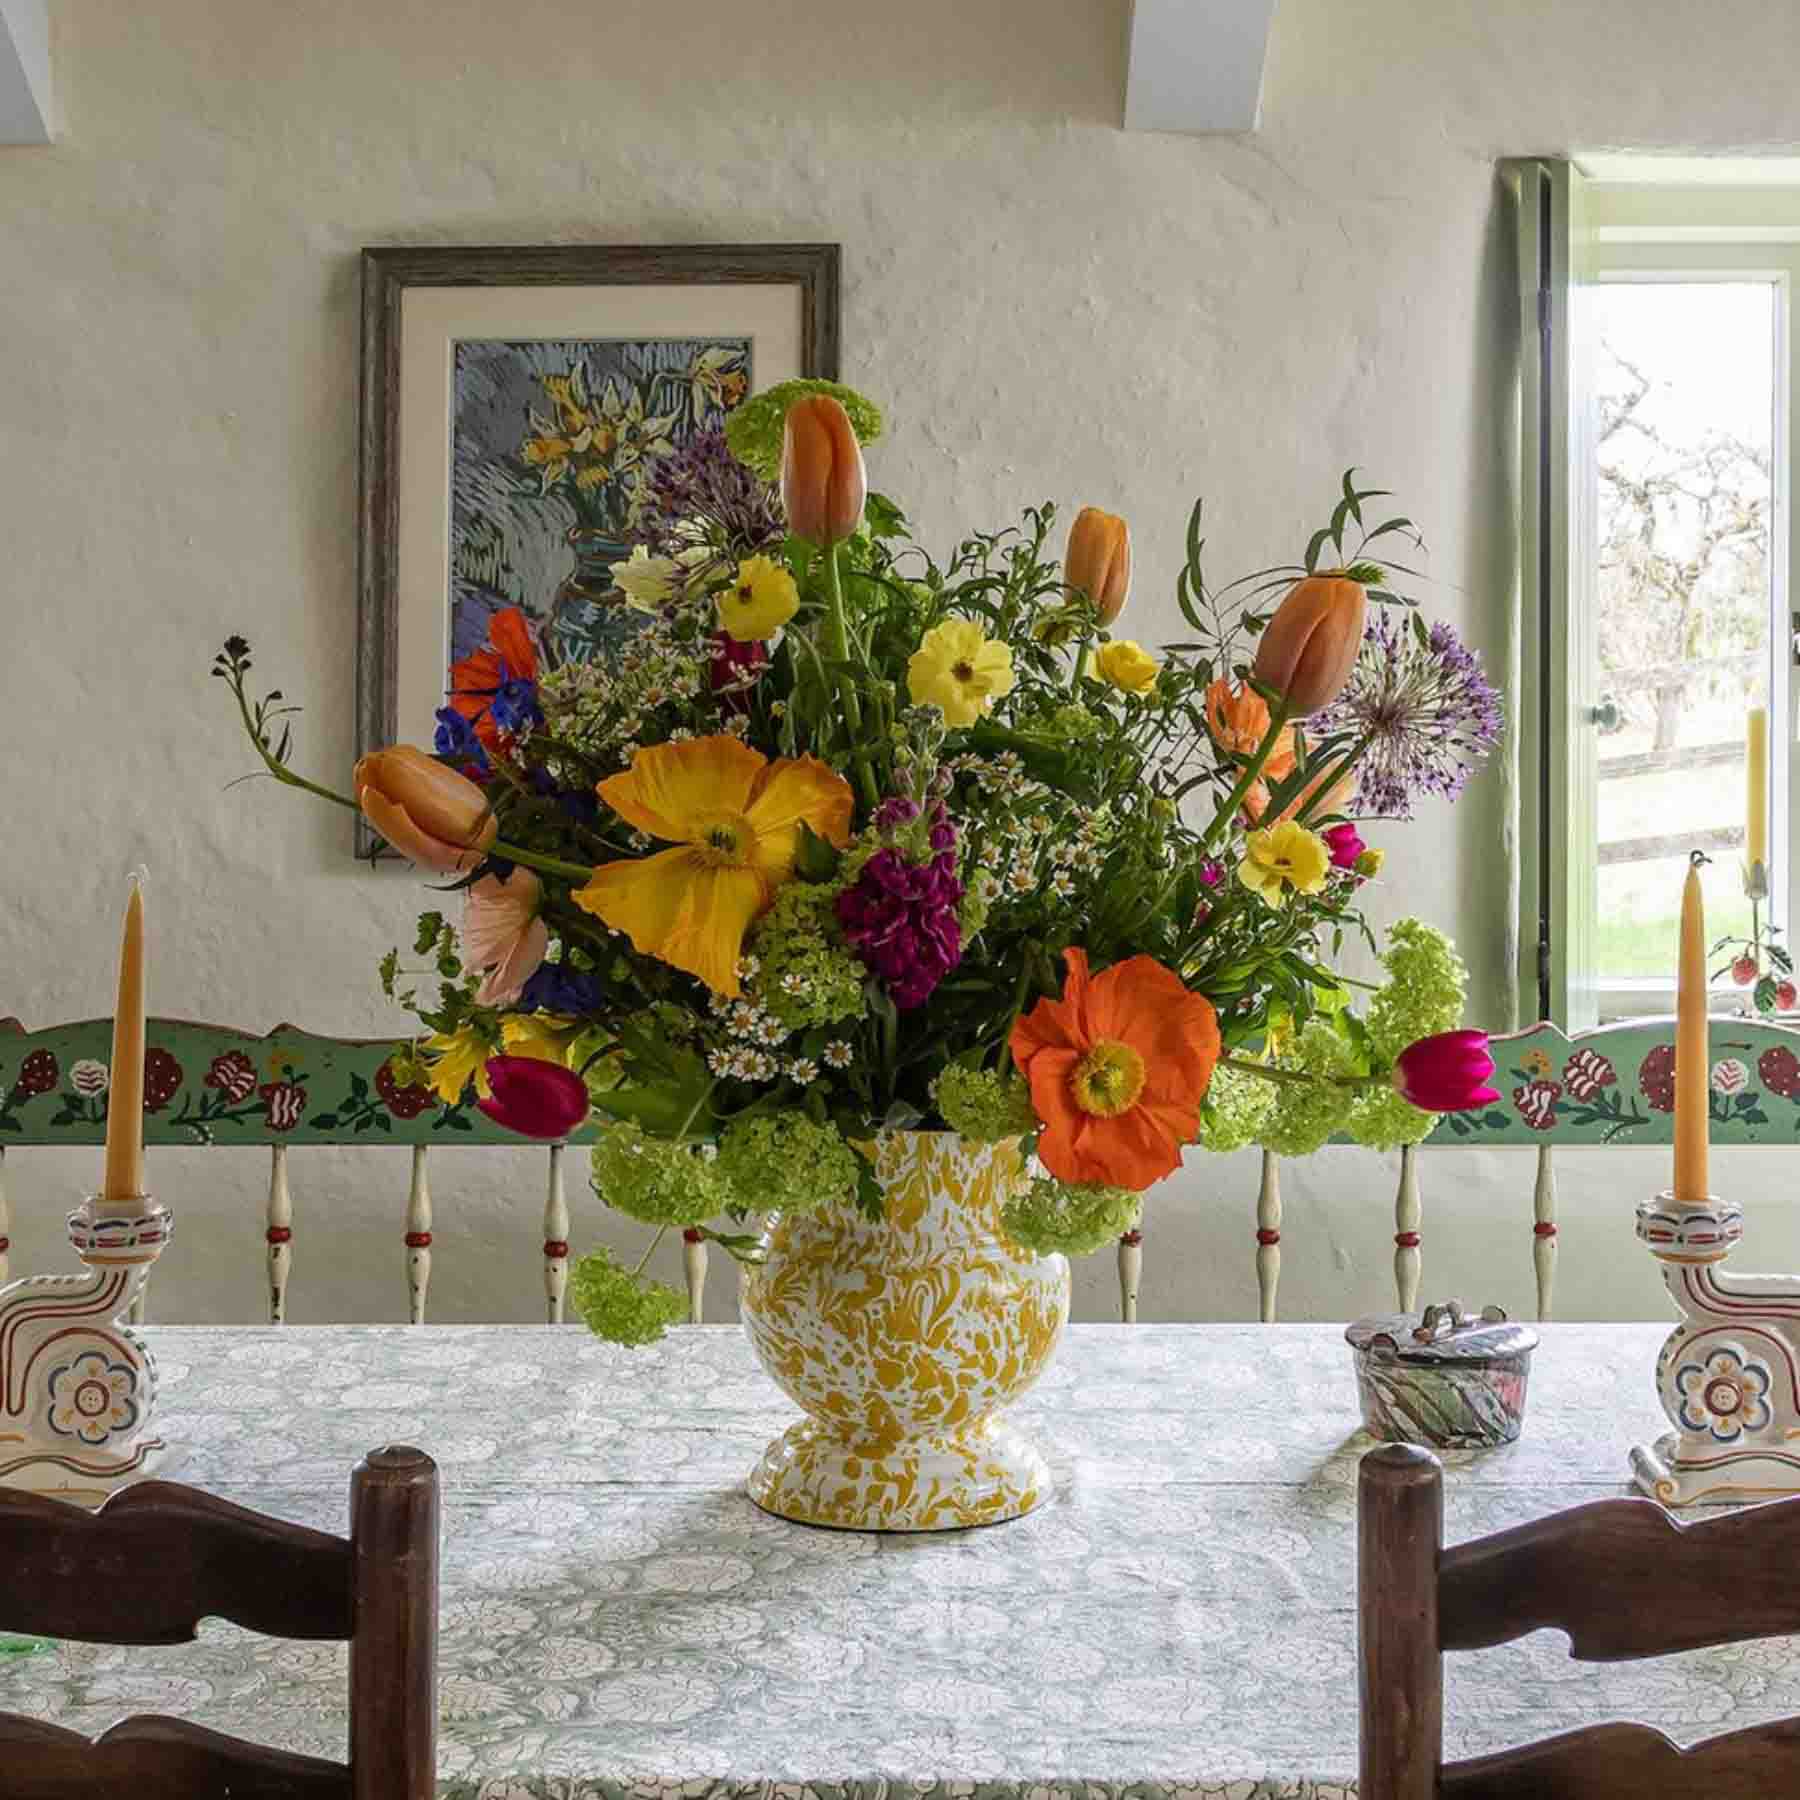 bringing nature into the kitchen is one of the most effective ways to welcome the spring